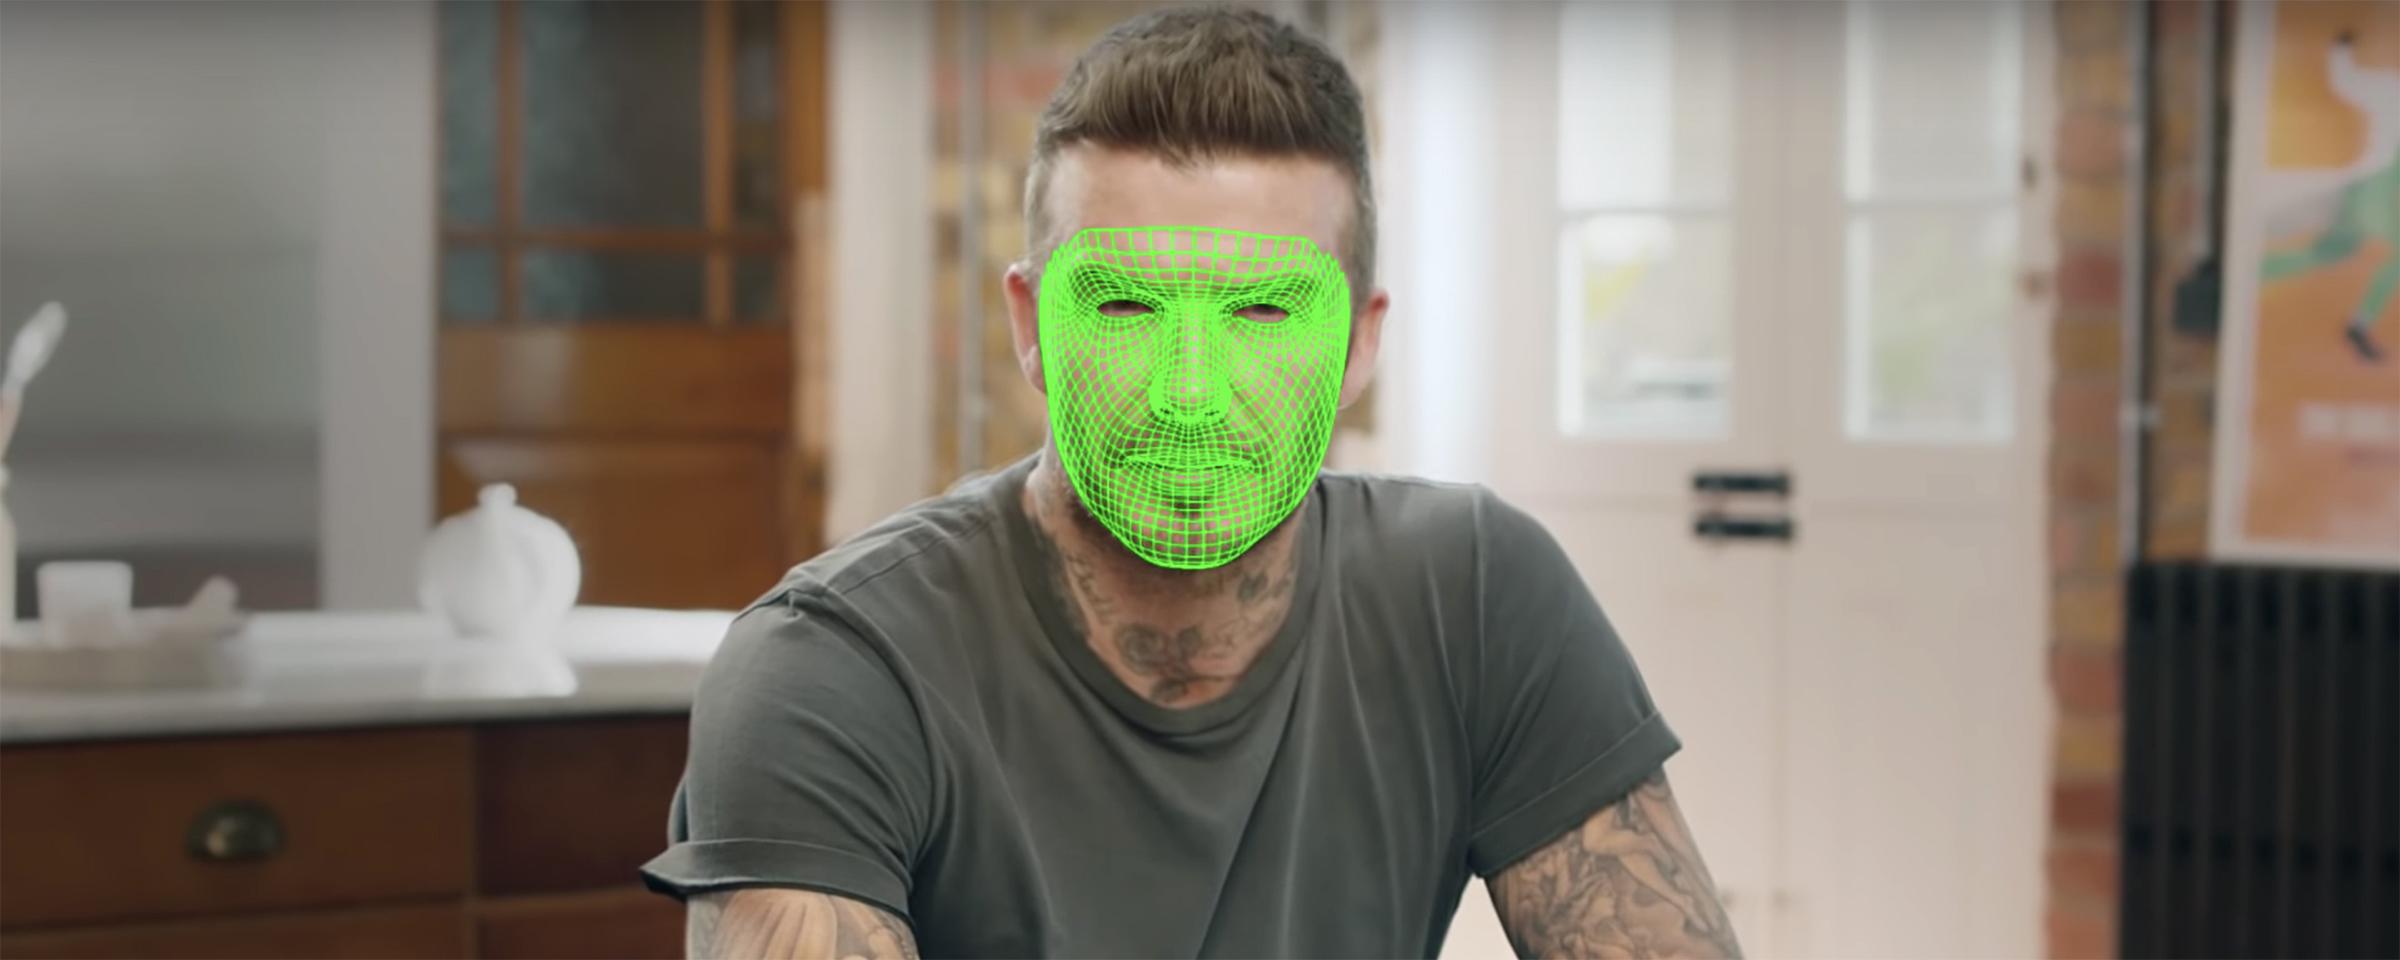 For this Zero Malaria Britain campaign featuring David Beckham, Synthesia worked to create versions of the soccer star speaking nine different languages.